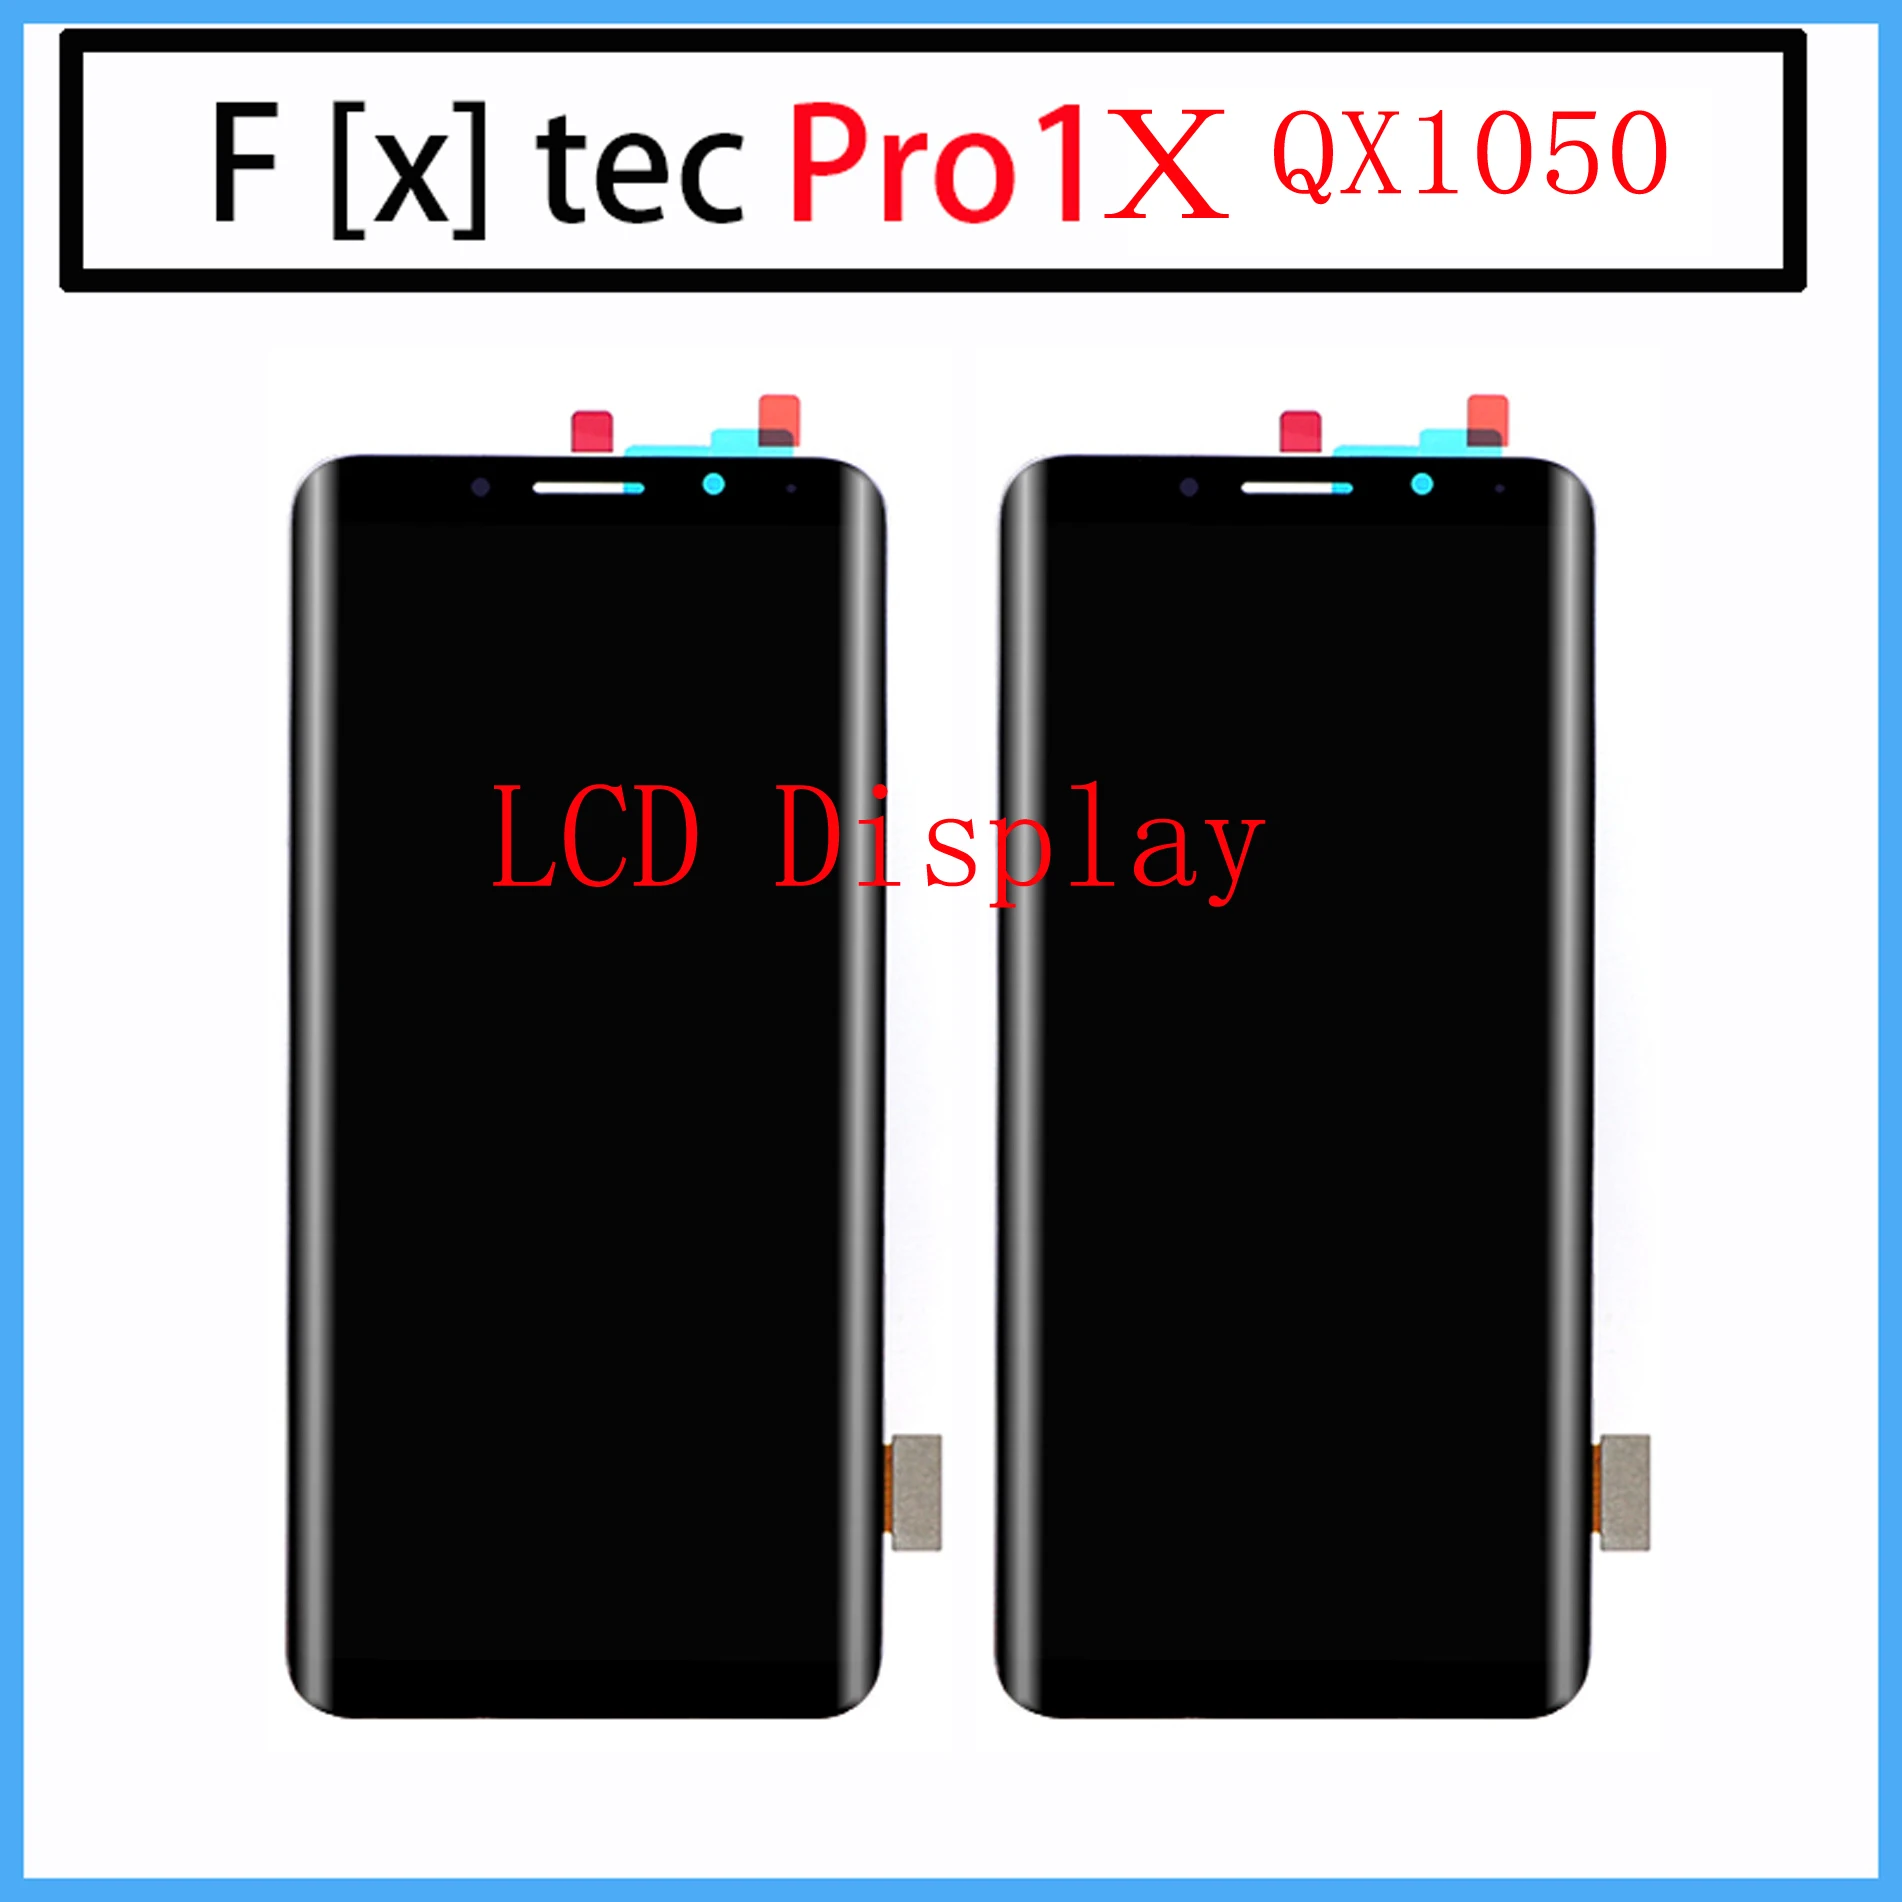 New 100% Original Tested For F(x)tec Pro1 X lcd display and touch screen  assembly repair parts for F [x] tec Pro1X QX1050